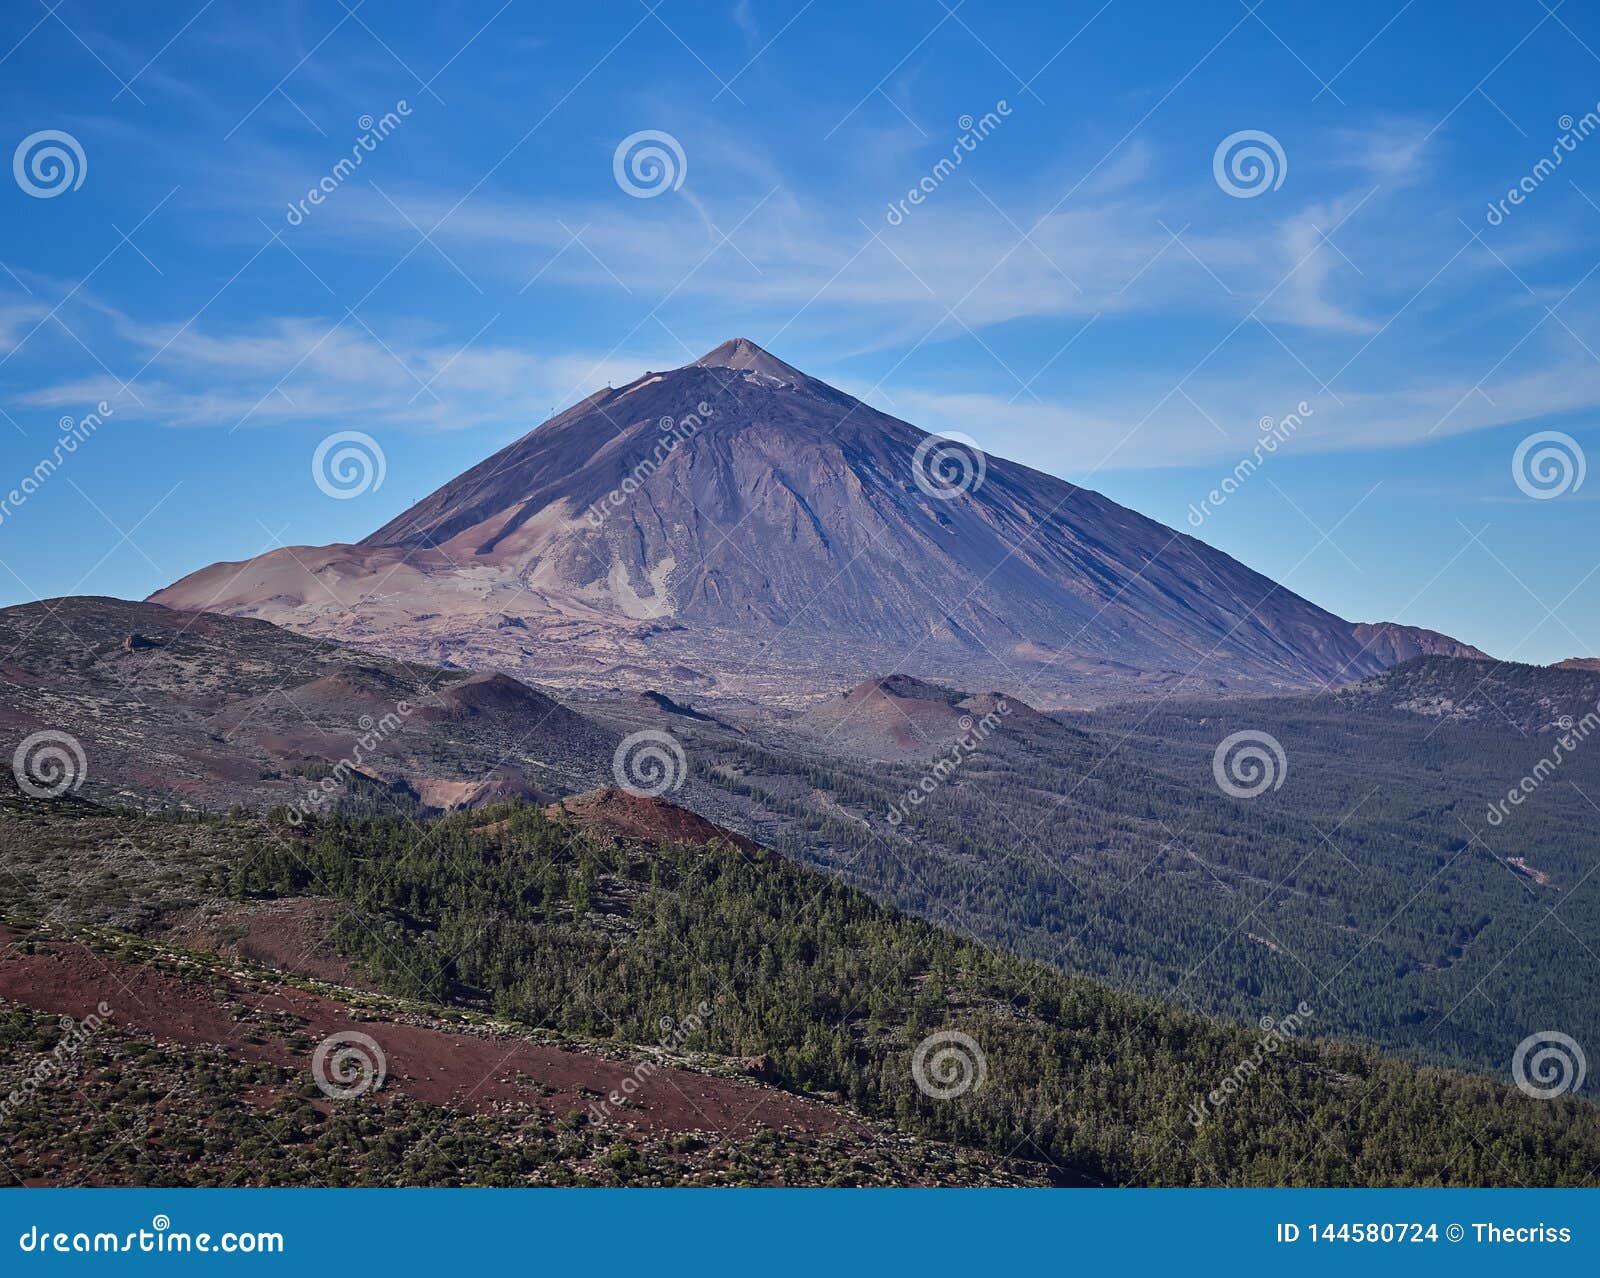 a spectacular view to the pico del teide volcano in tenerife national park, canary island, spain